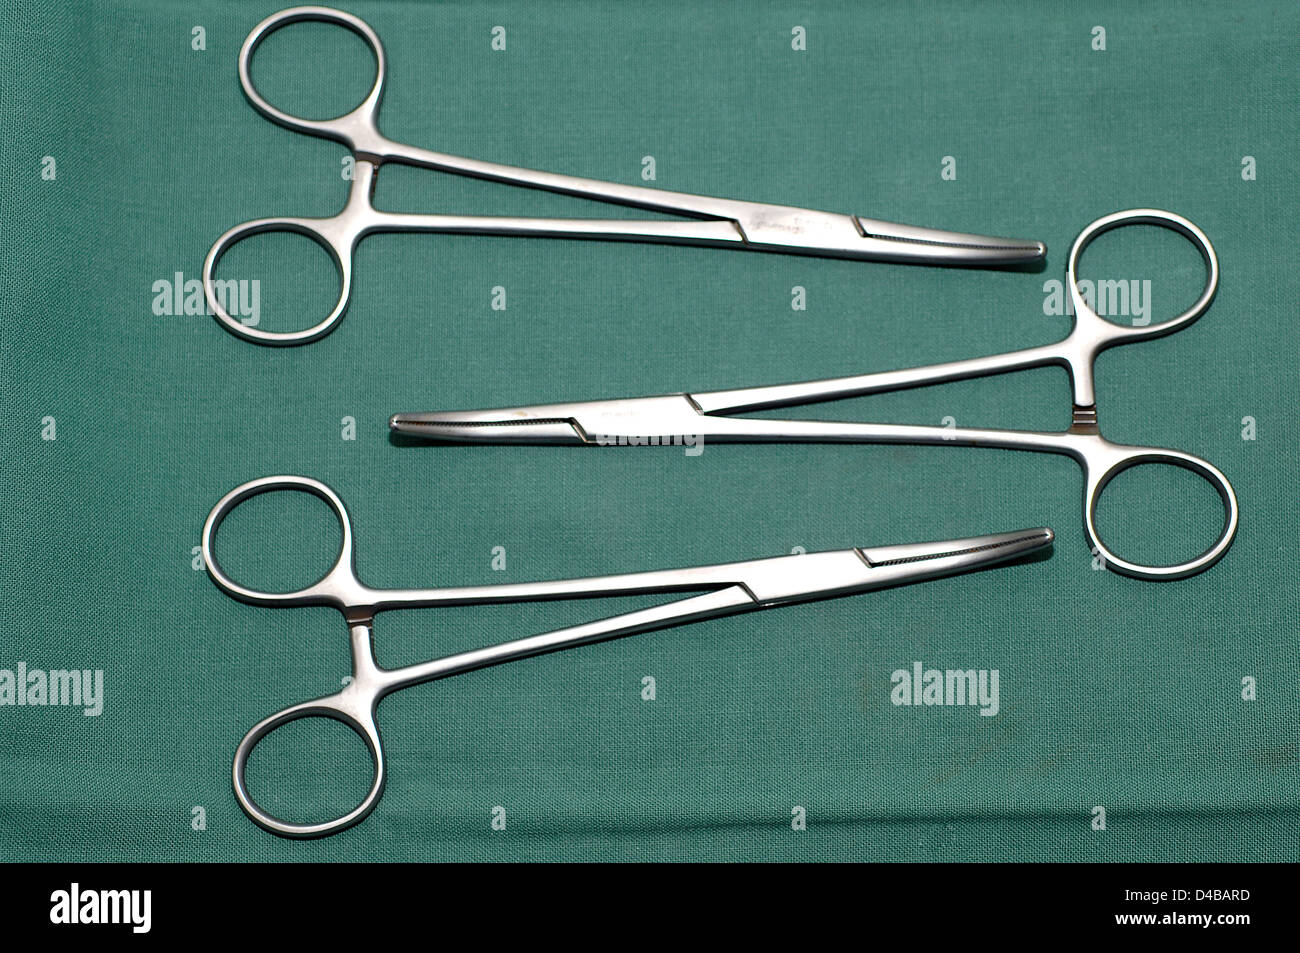 Artery forceps for grasping and compressing an artery. Stock Photo